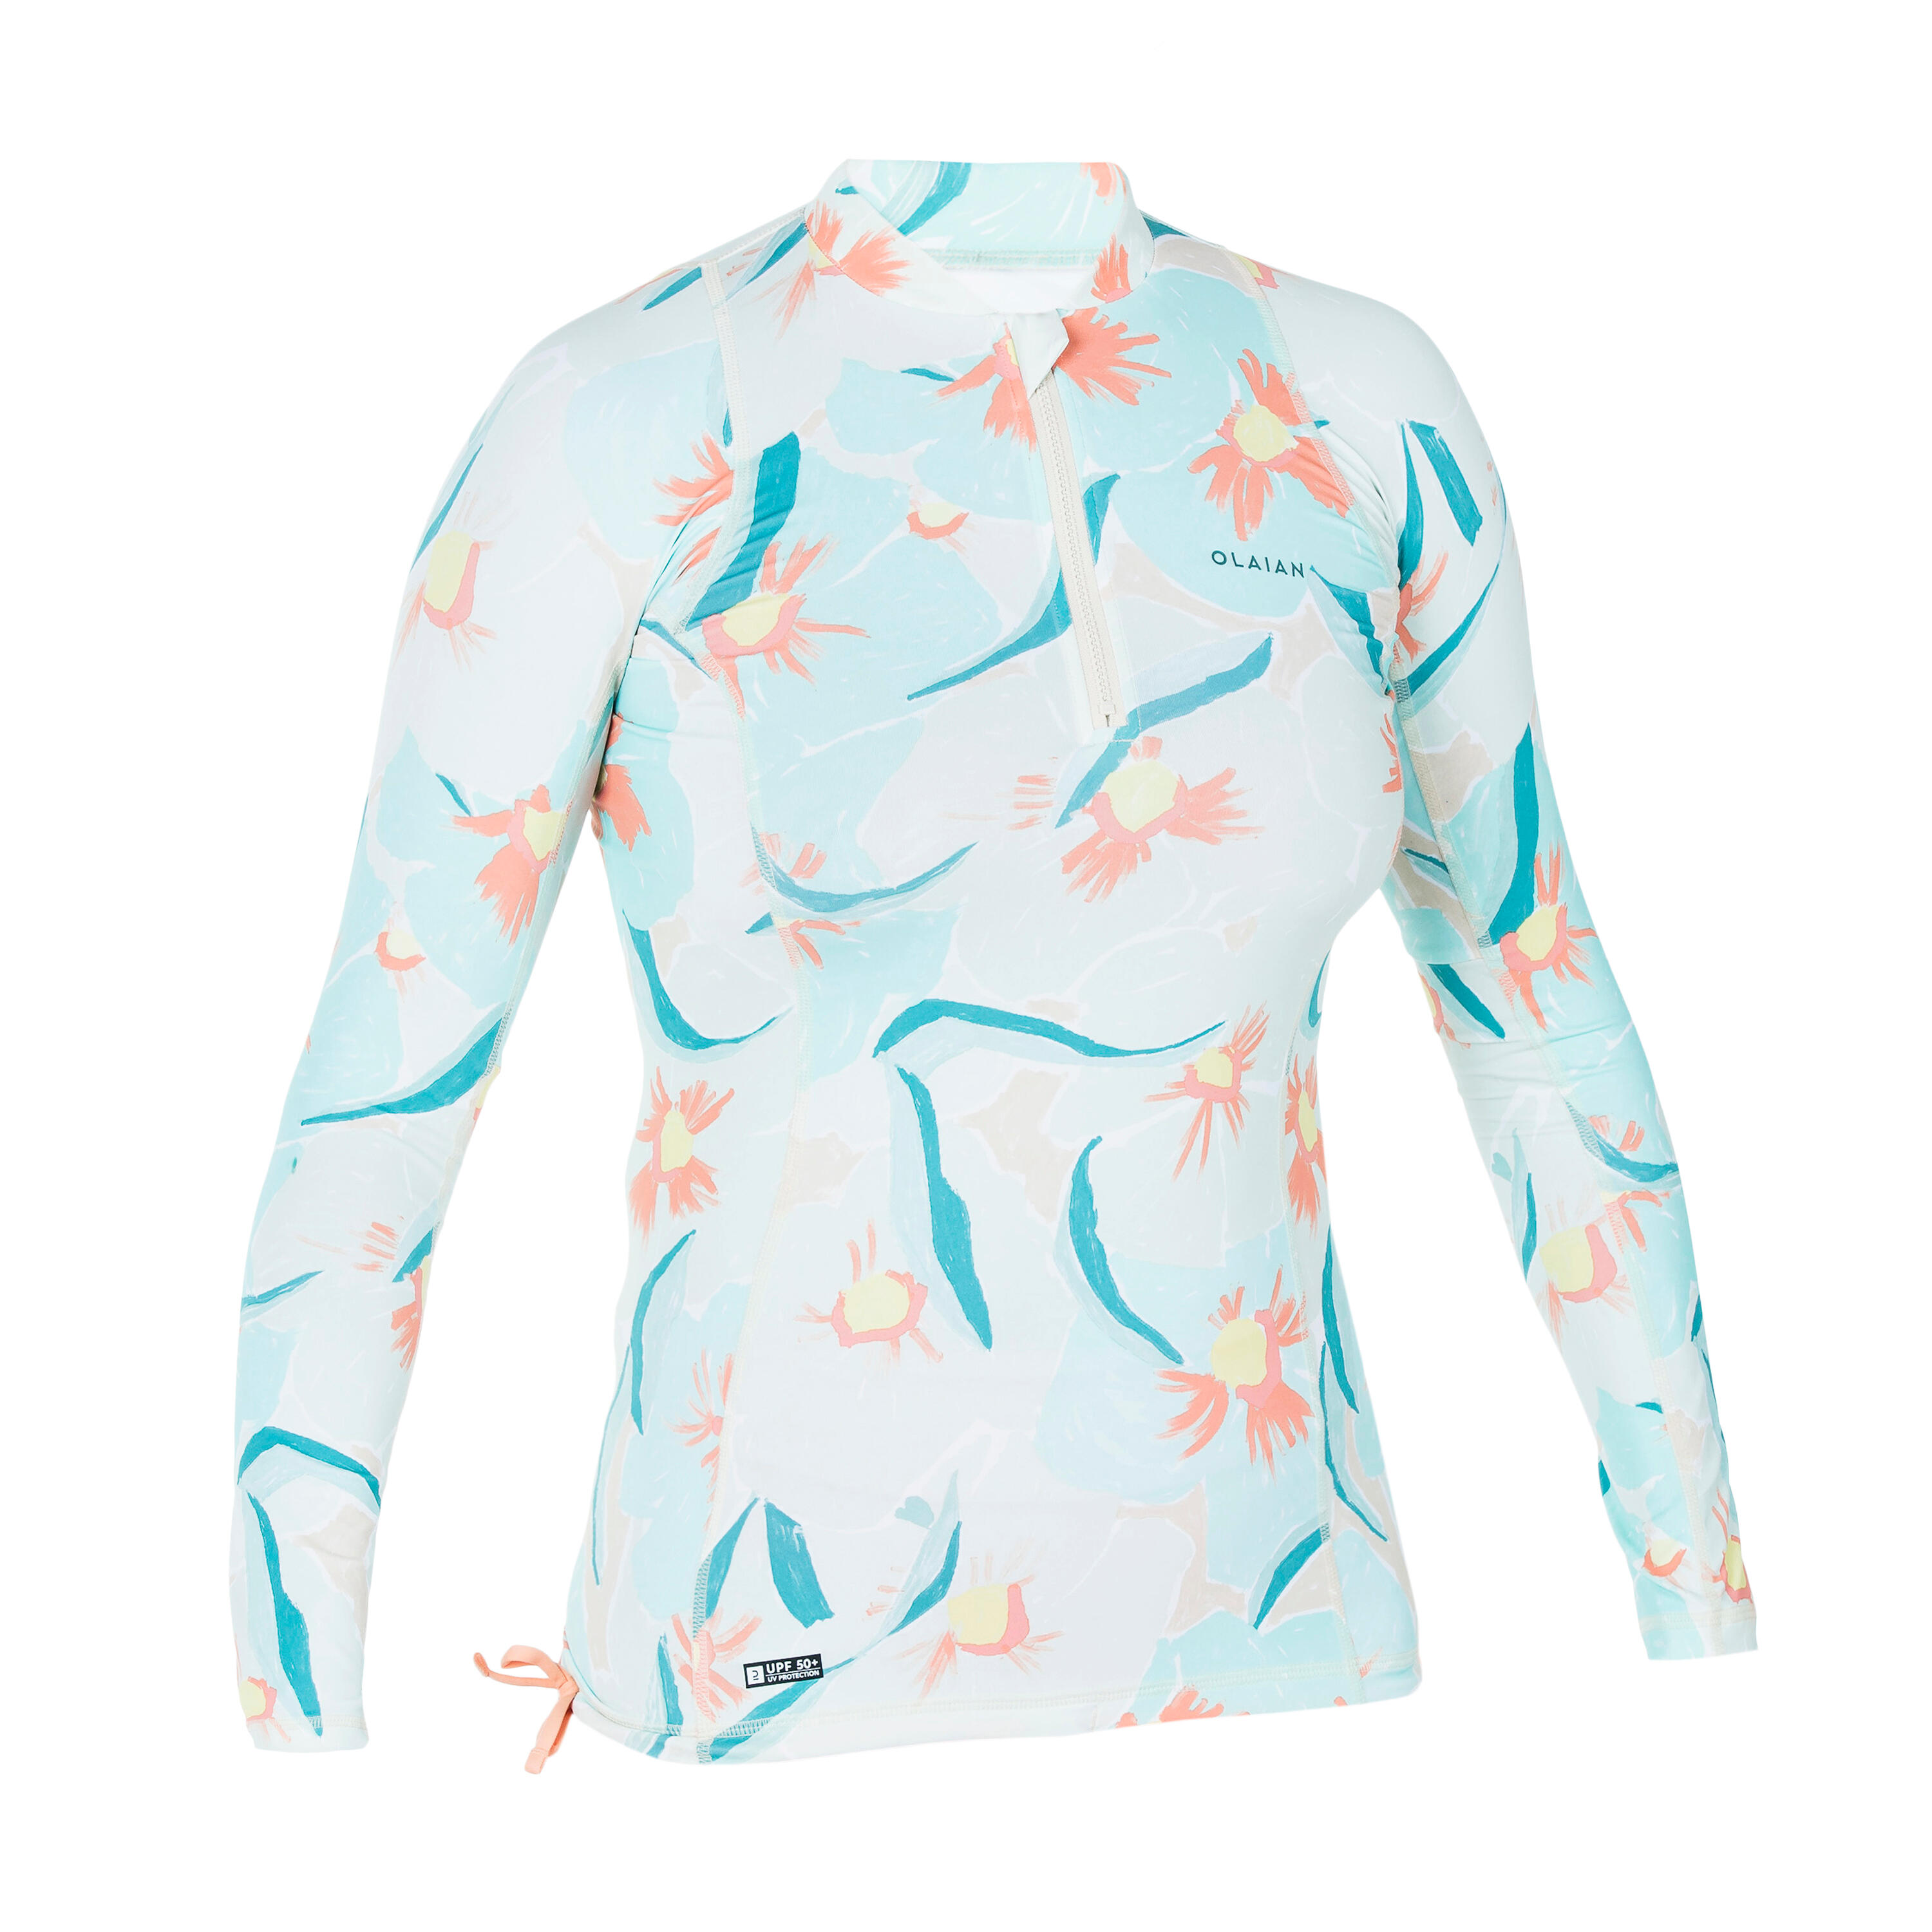 Women's Long Sleeve T-Shirt UV-Protection Surf Top 500 ANAMONES 5/12